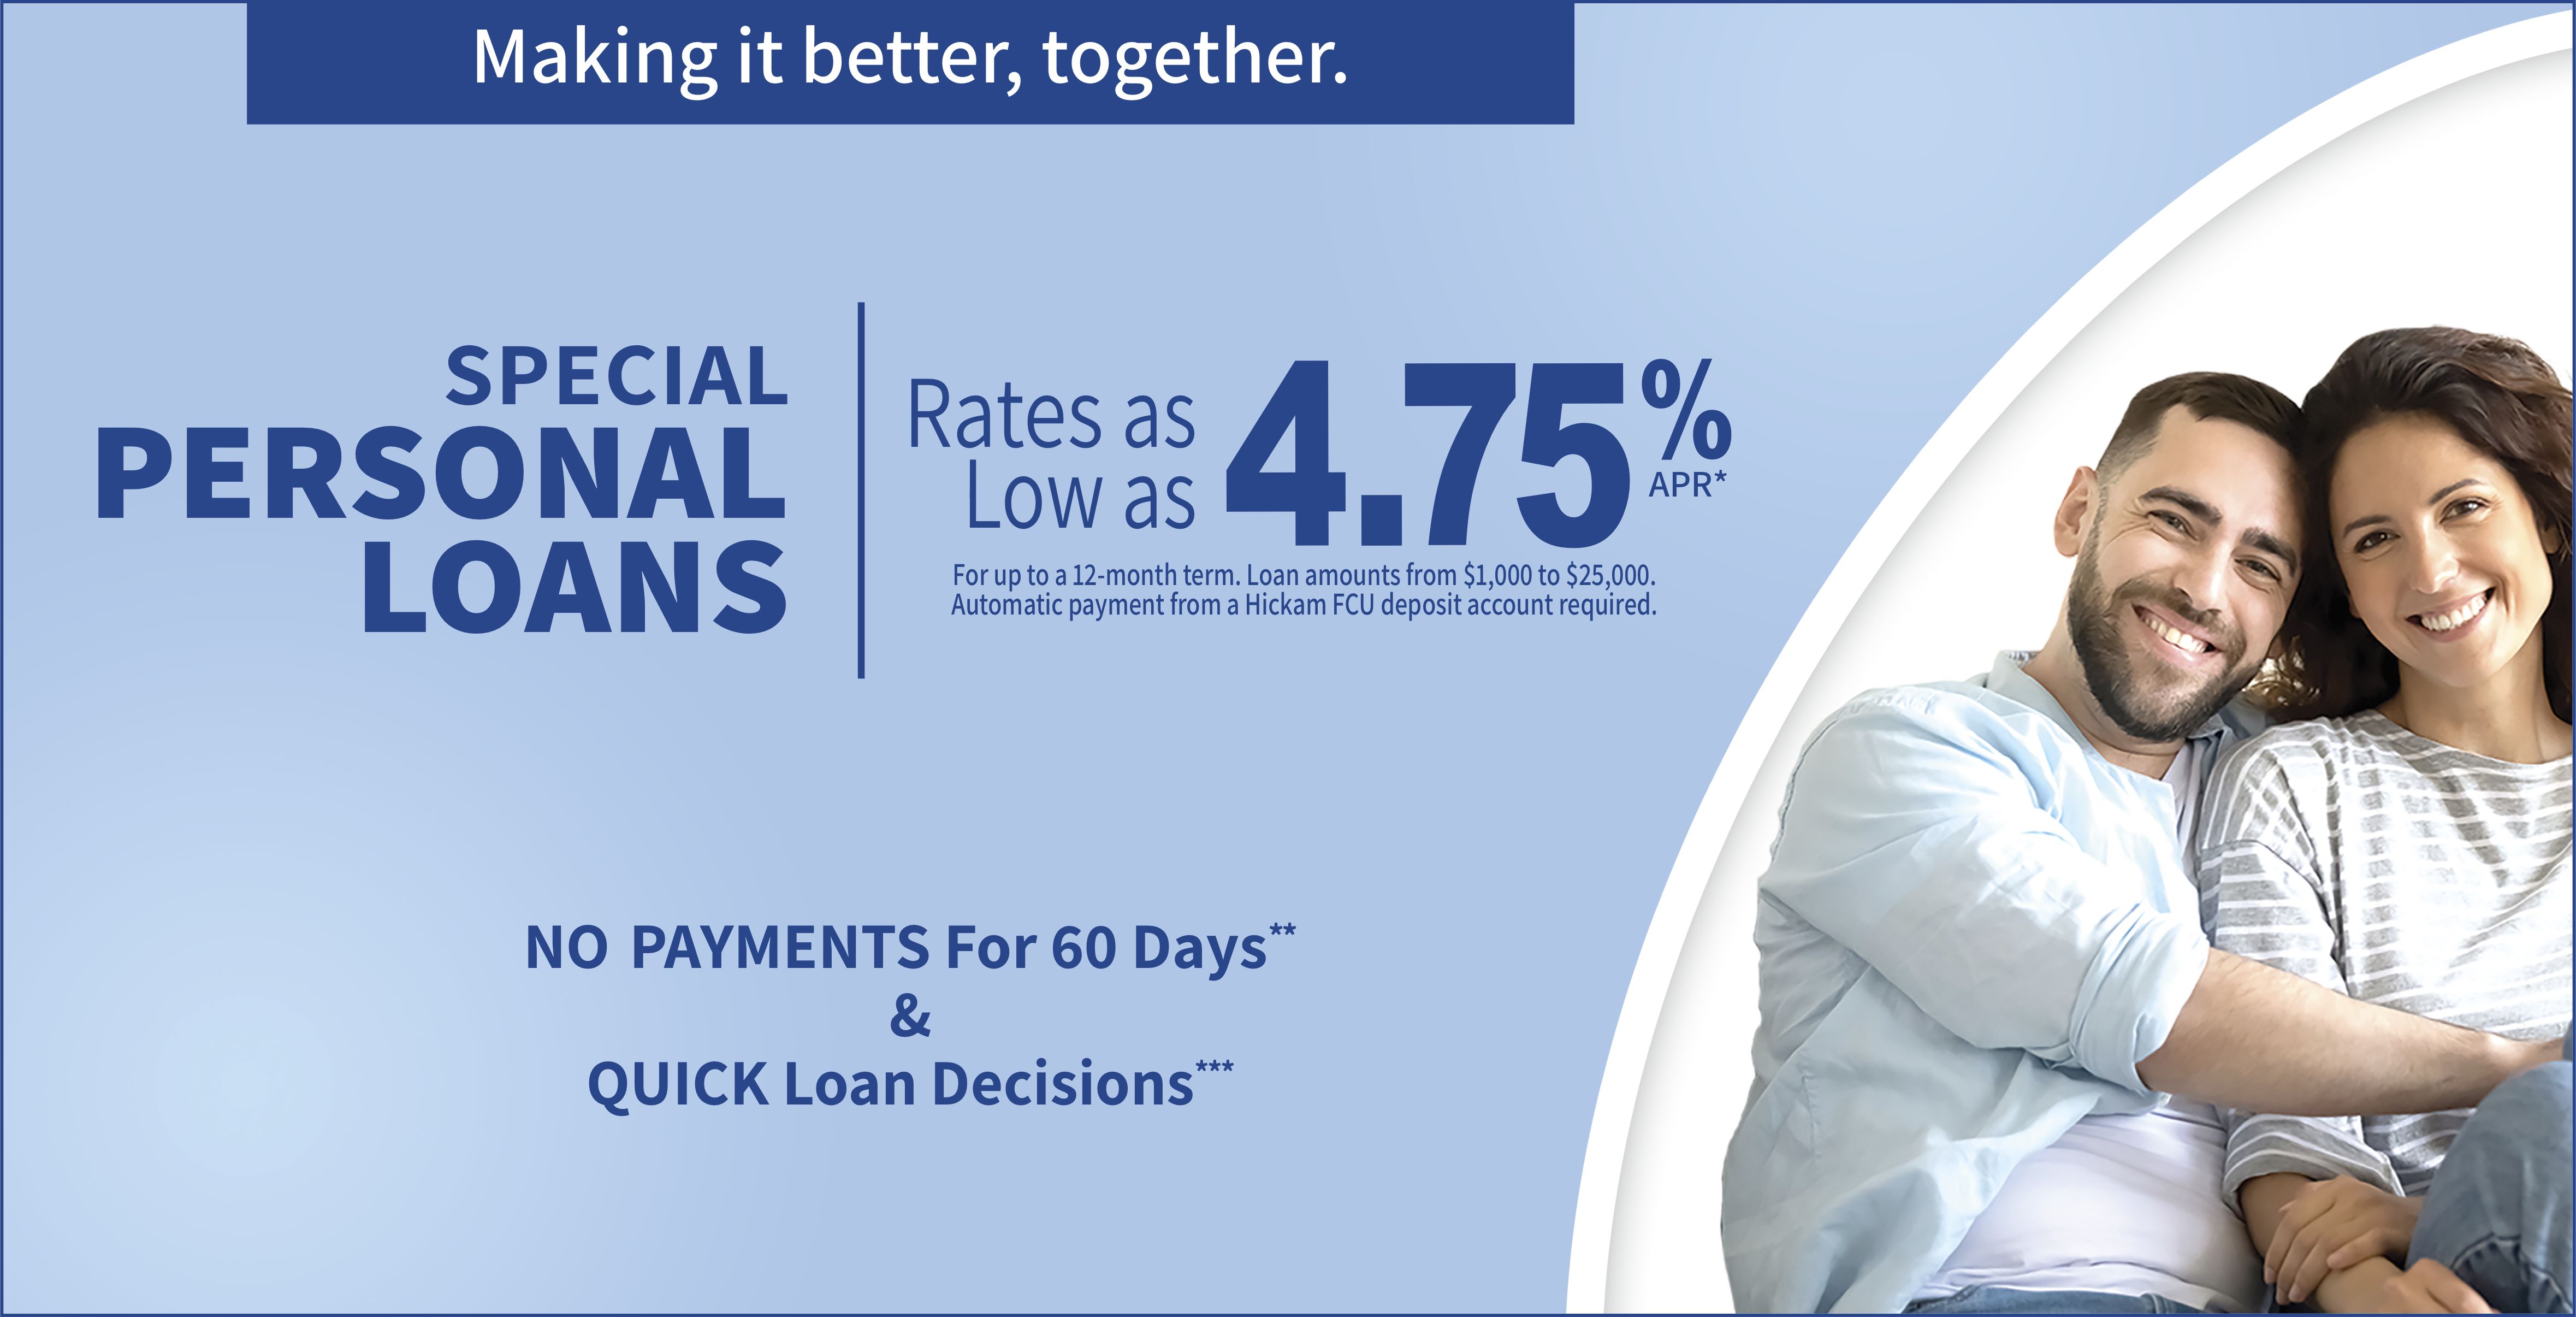 Personal Loan Special with rates as low as 3.90% APR for up to 60-months.